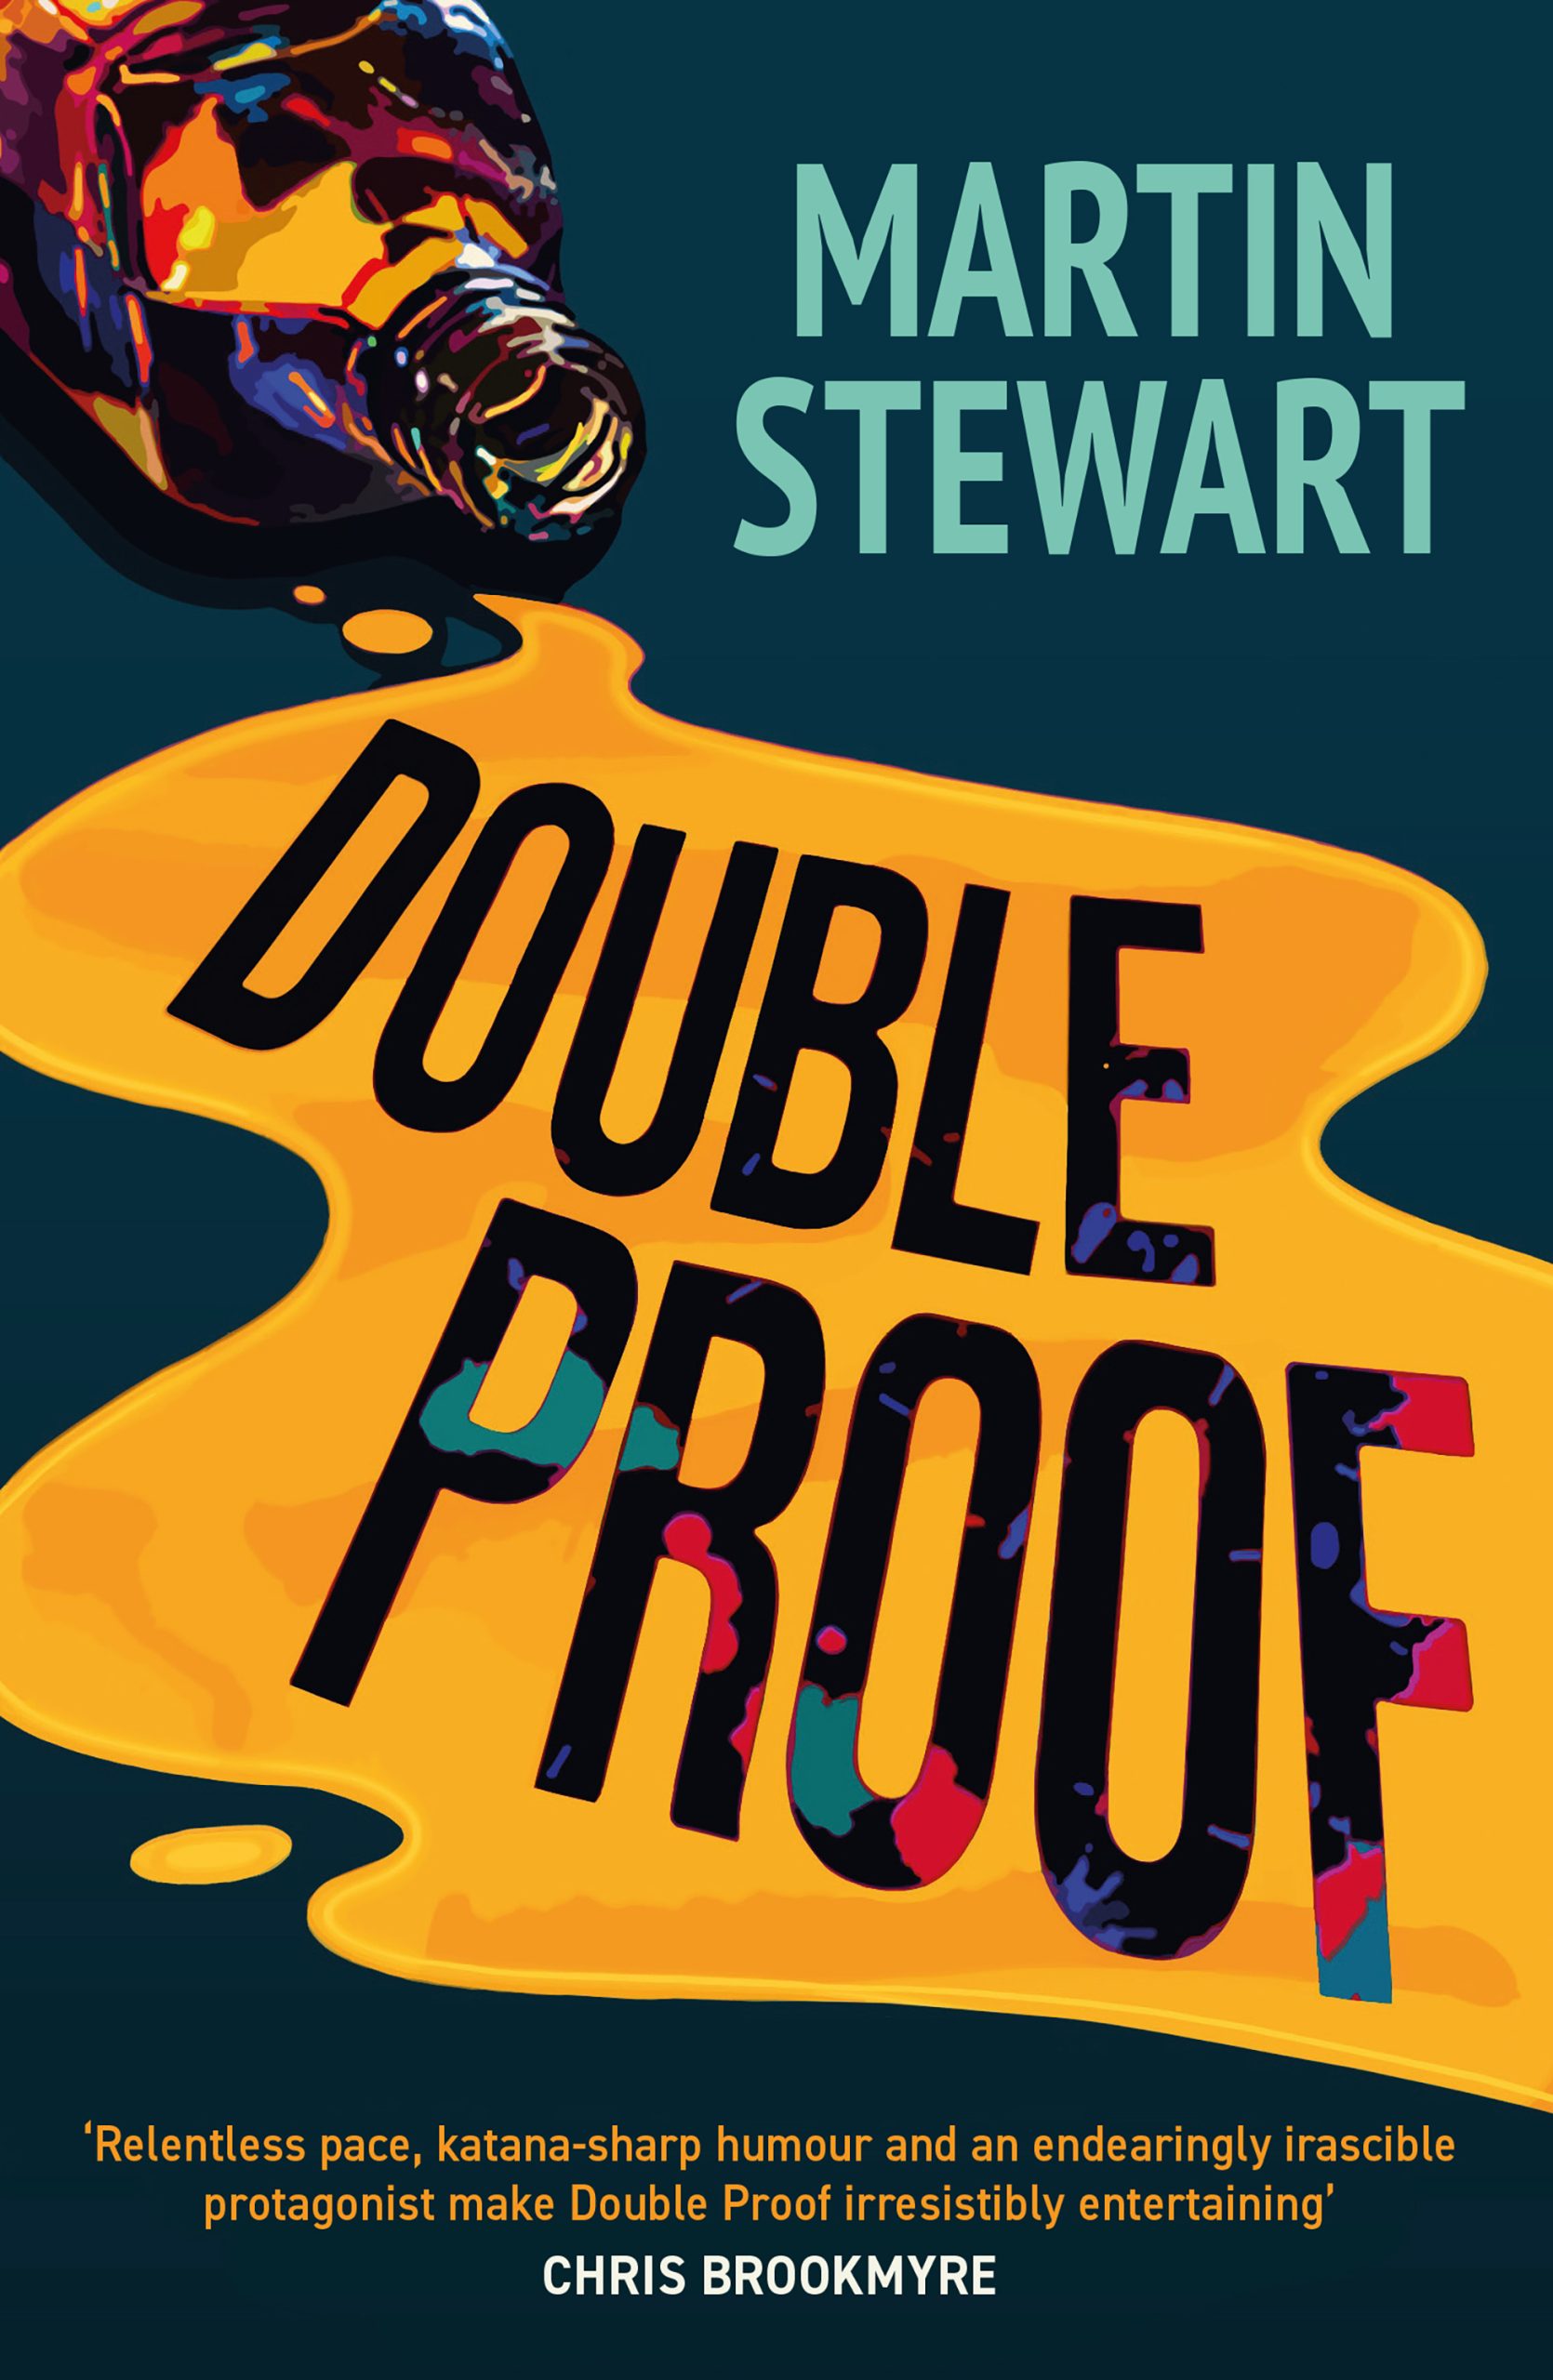 Double Proof is Martin's adult fiction debut.